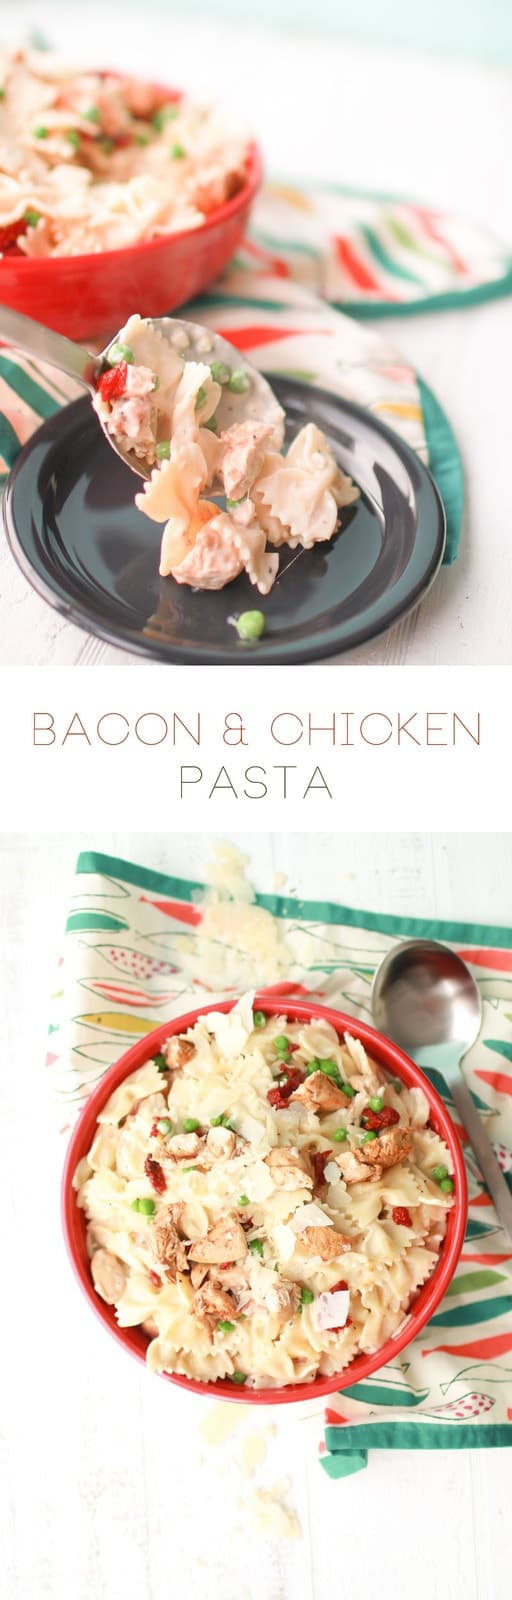 bacon and chicken pasta pinterest image